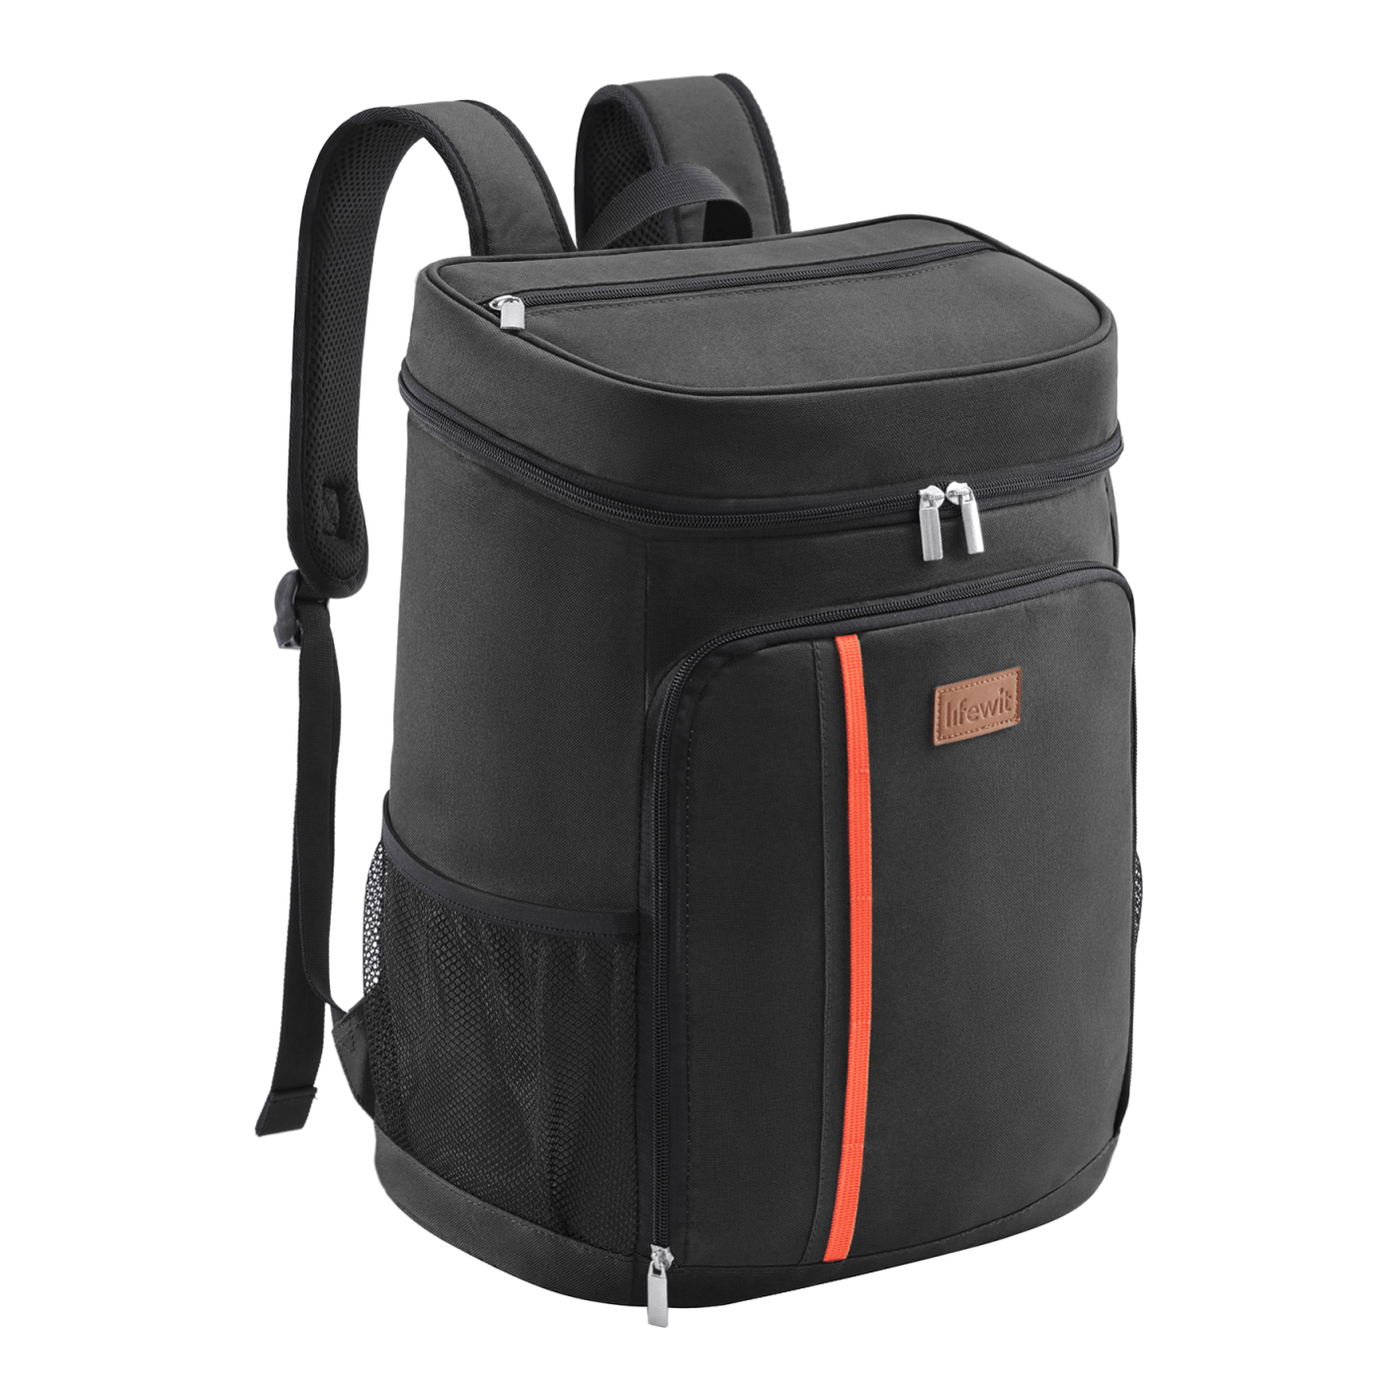 Insulated Soft Backpack Cooler - Lifewit – Lifewitstore